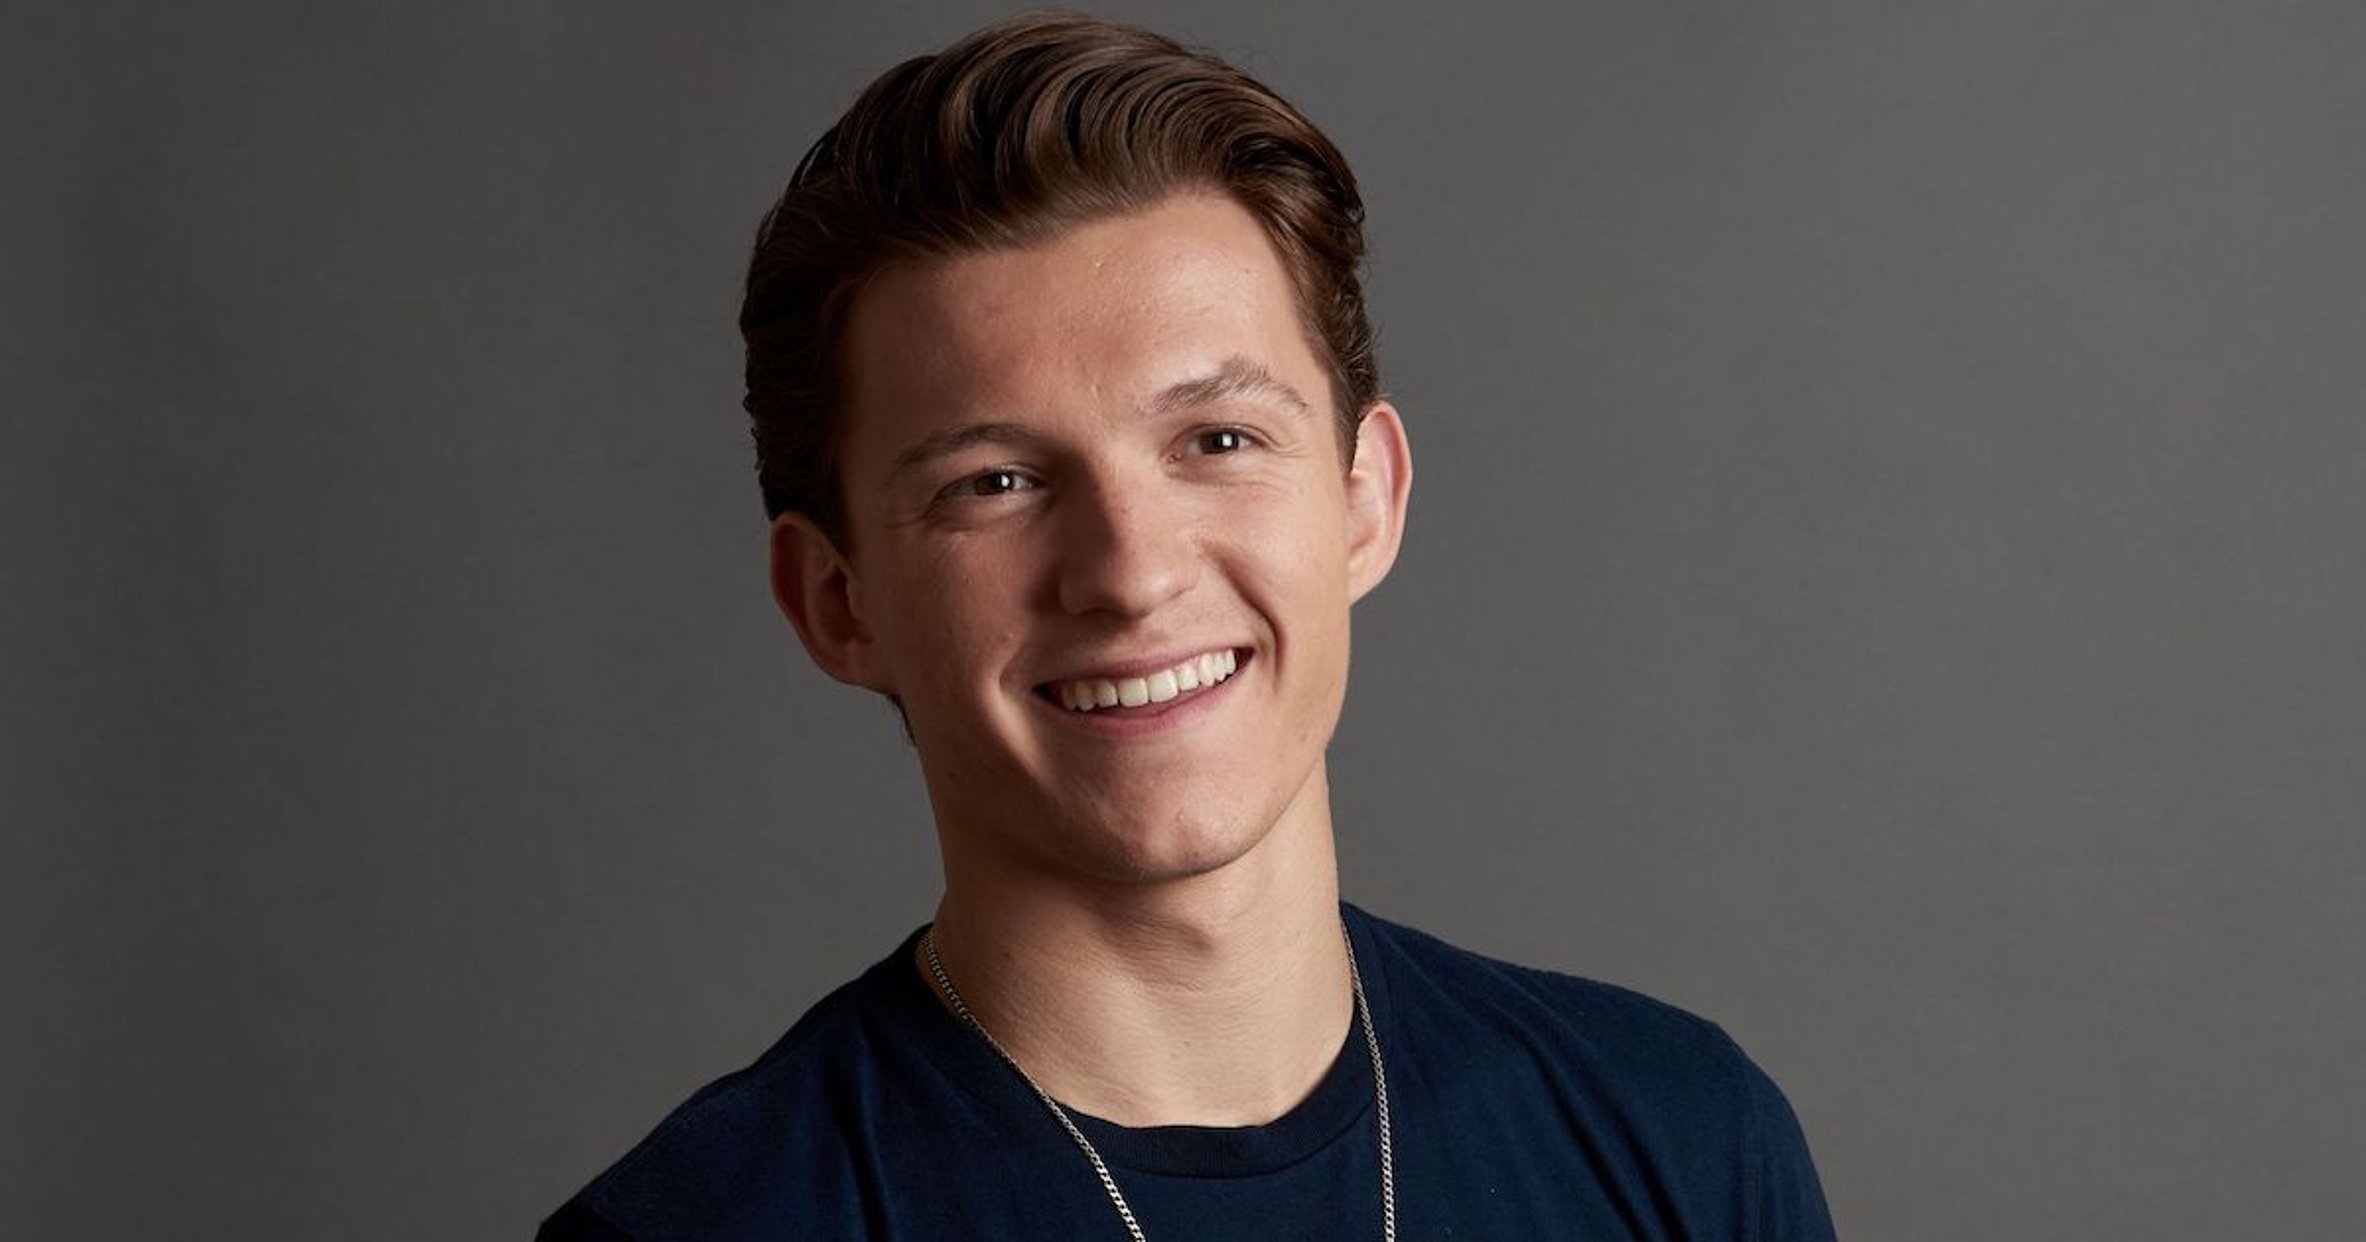 Tom Holland’s New Movie The Devil All The Time is Now Casting Choir Members